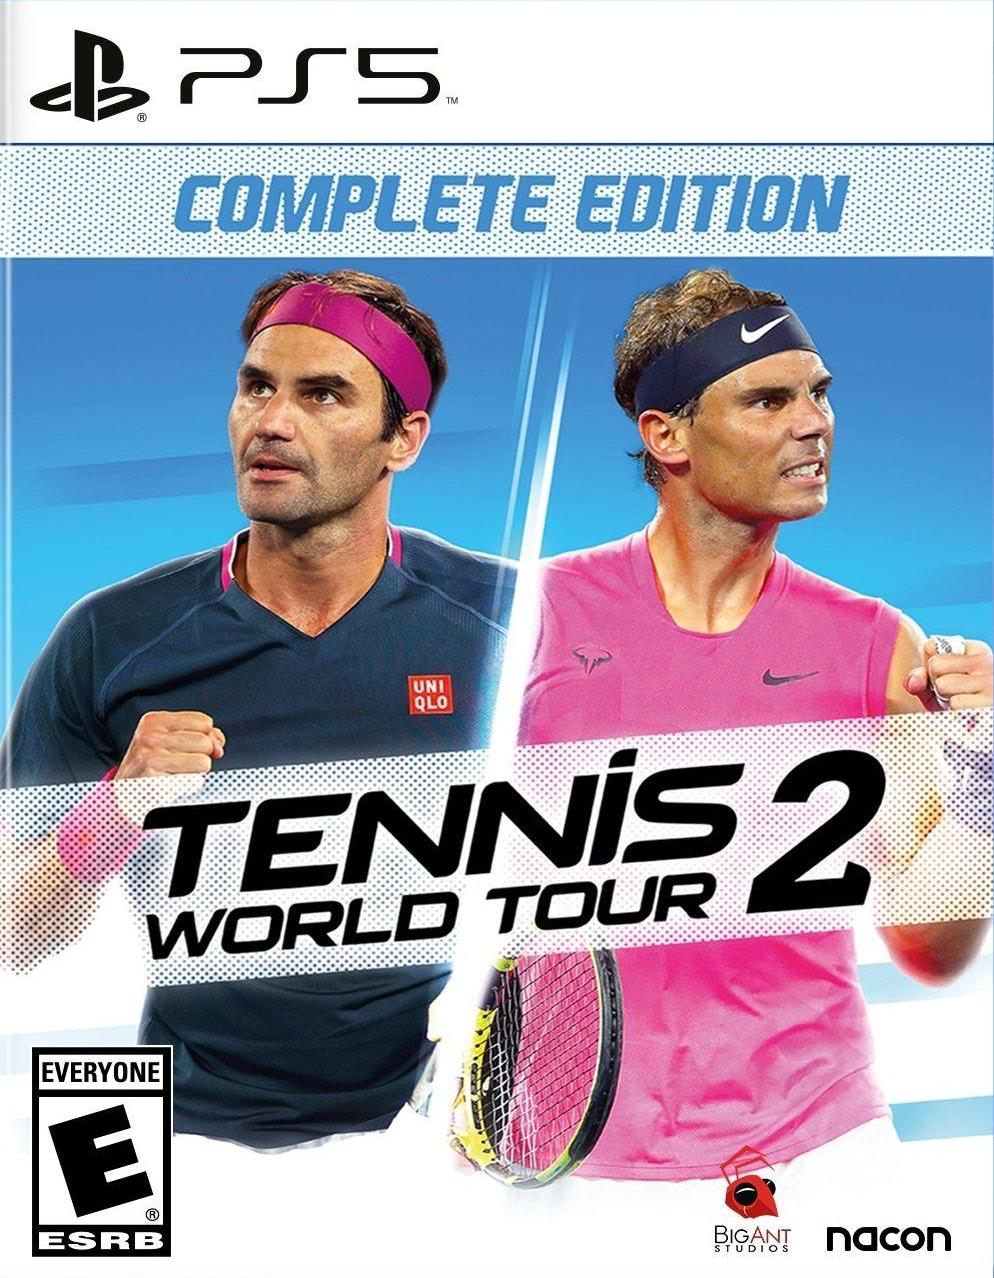 Tennis World Tour 2 - Complete Edition - PS5